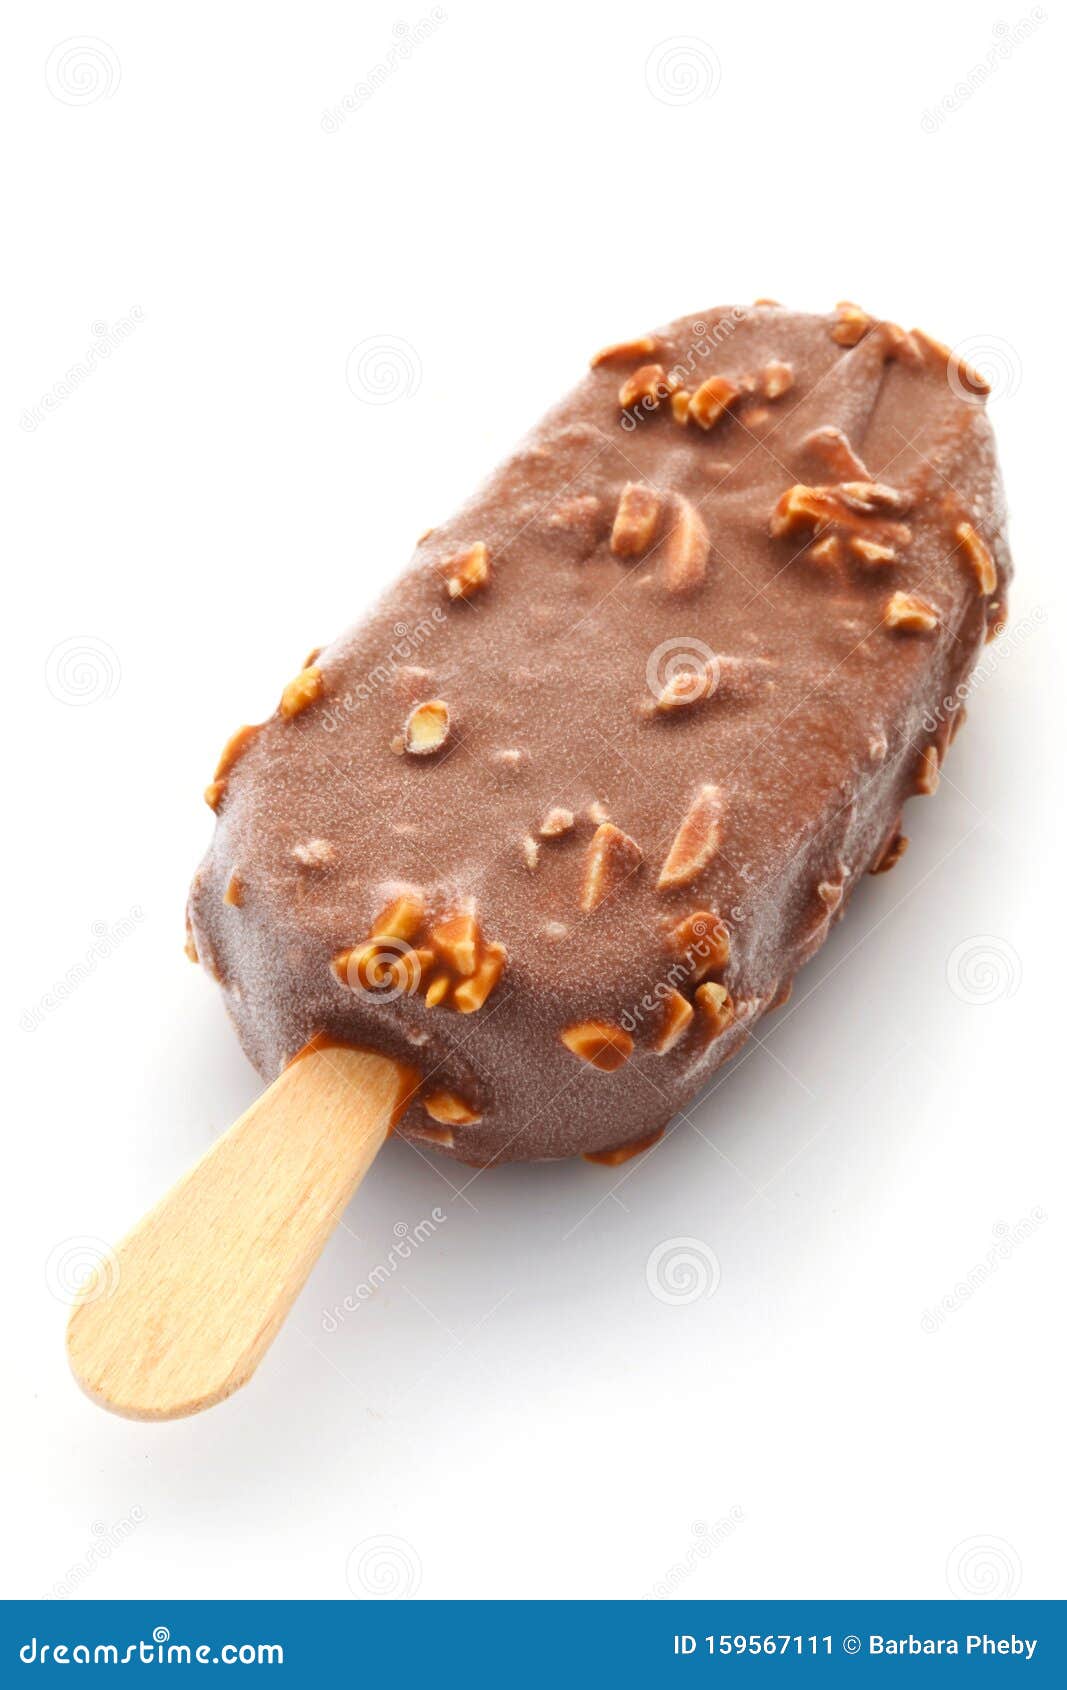 Chocolate Ice Lolly stock image. Image of unhealthy - 159567111